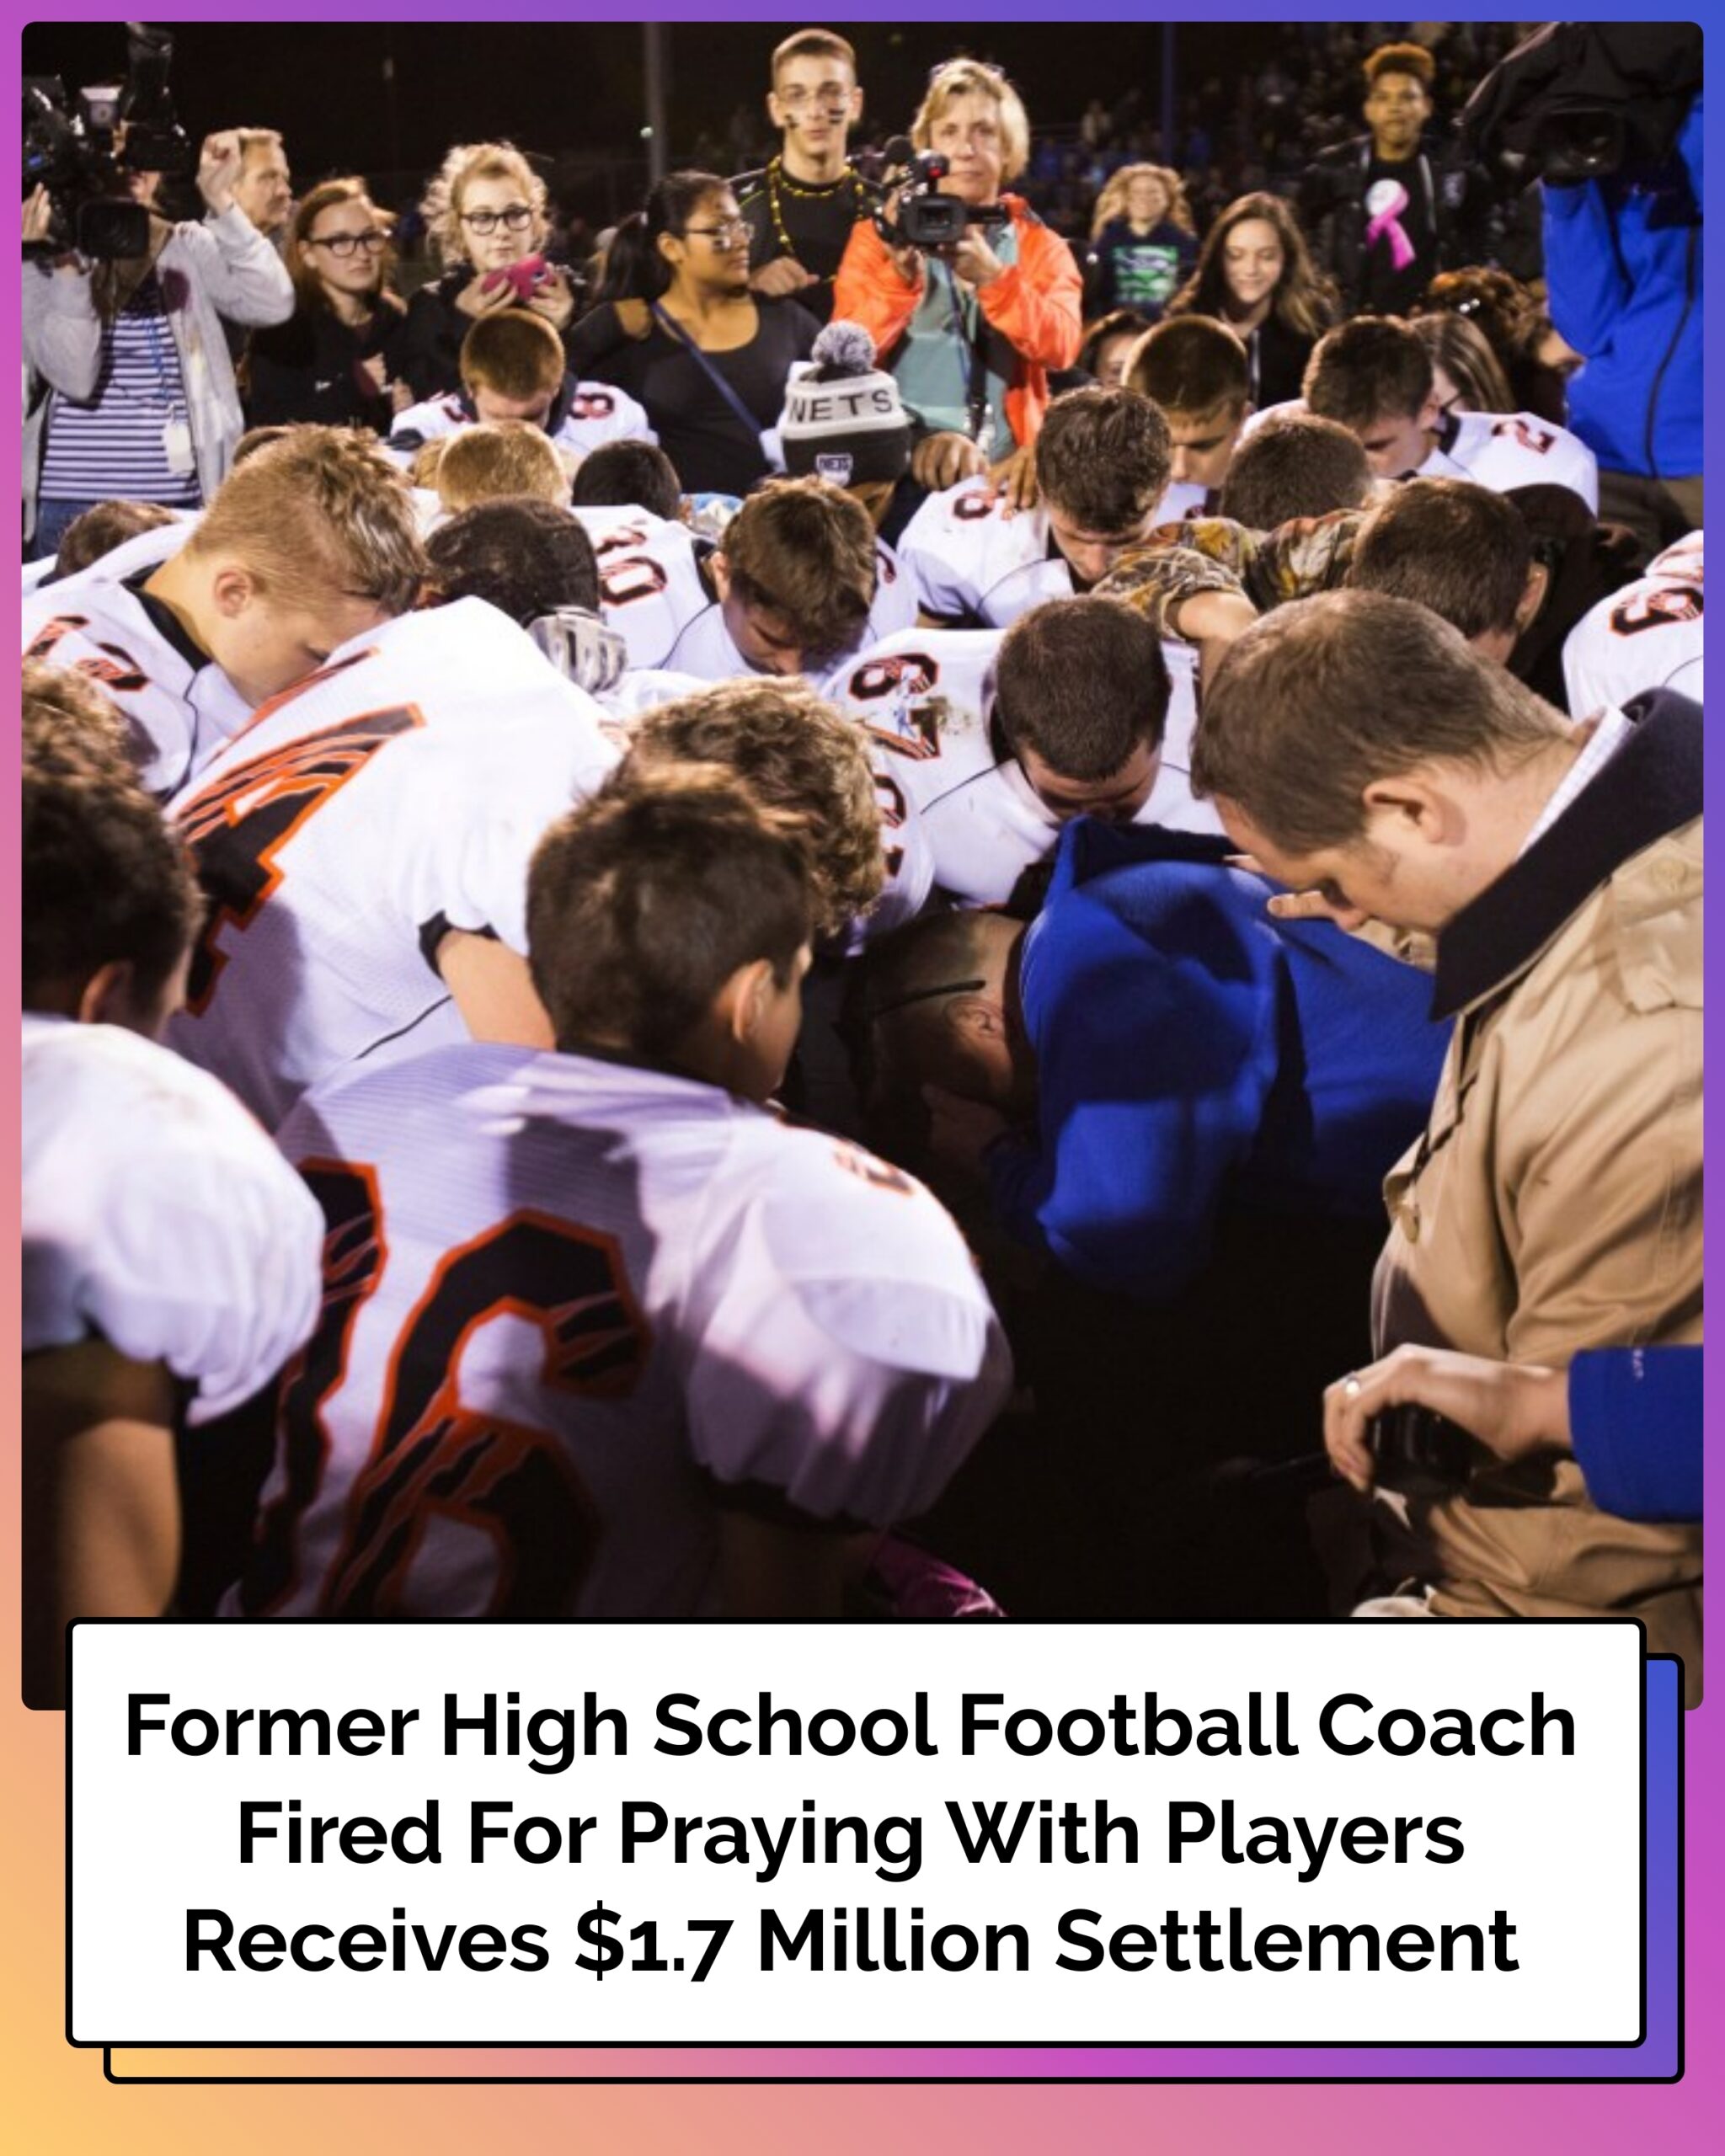 Former High School Football Coach Fired For Praying With Players Receives $1.7 Million Settlement